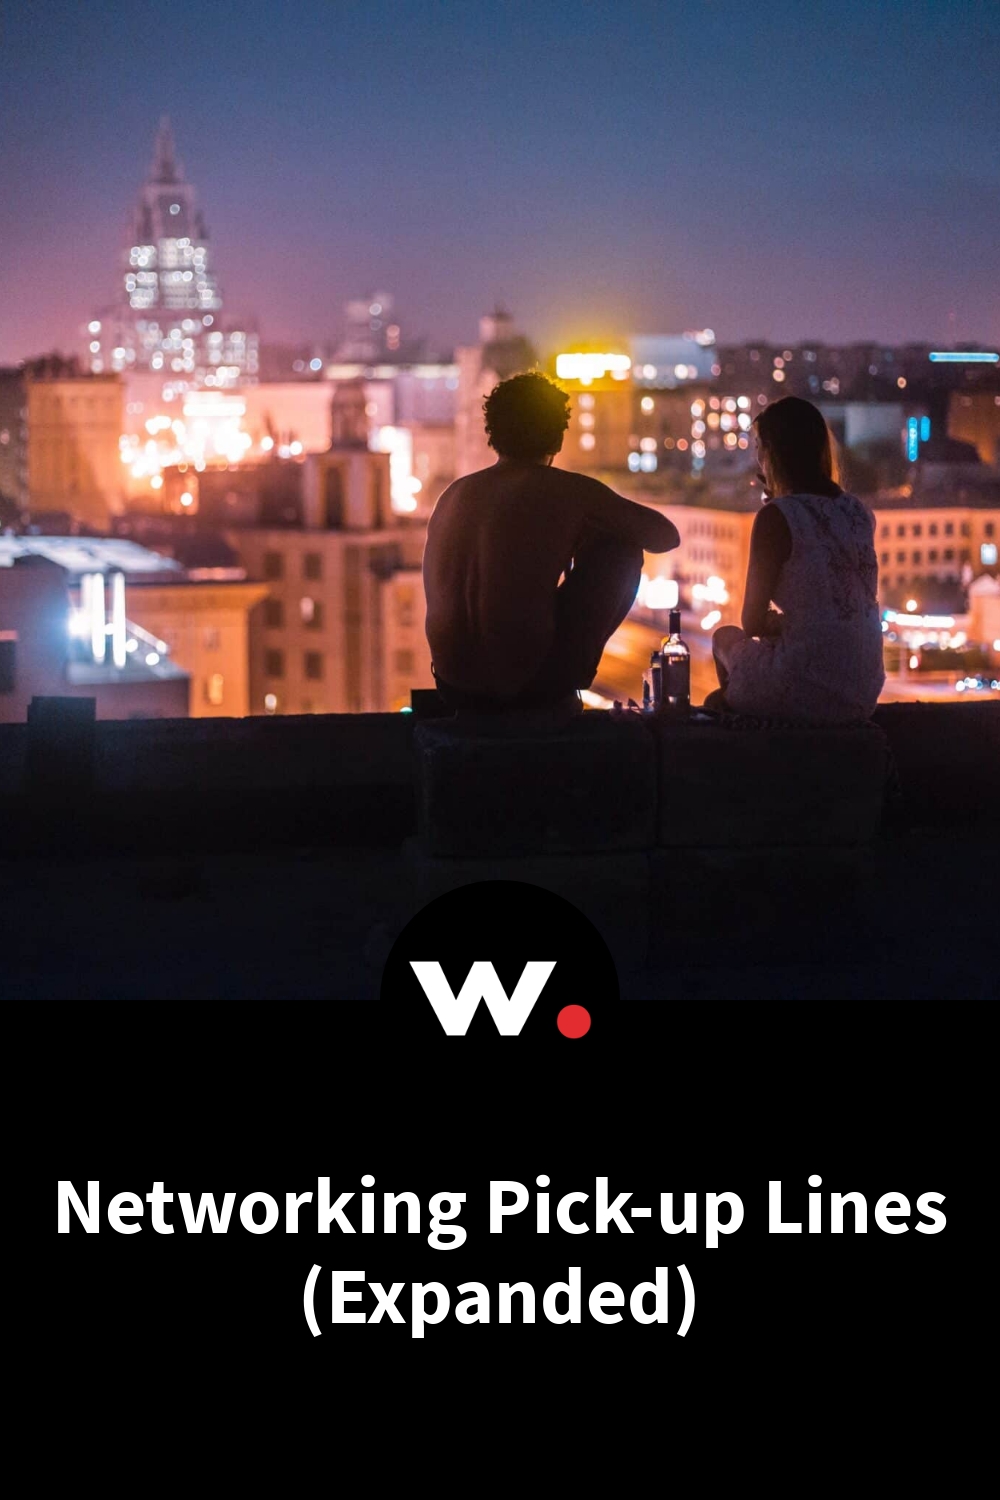 Networking Pick-up Lines (Expanded)